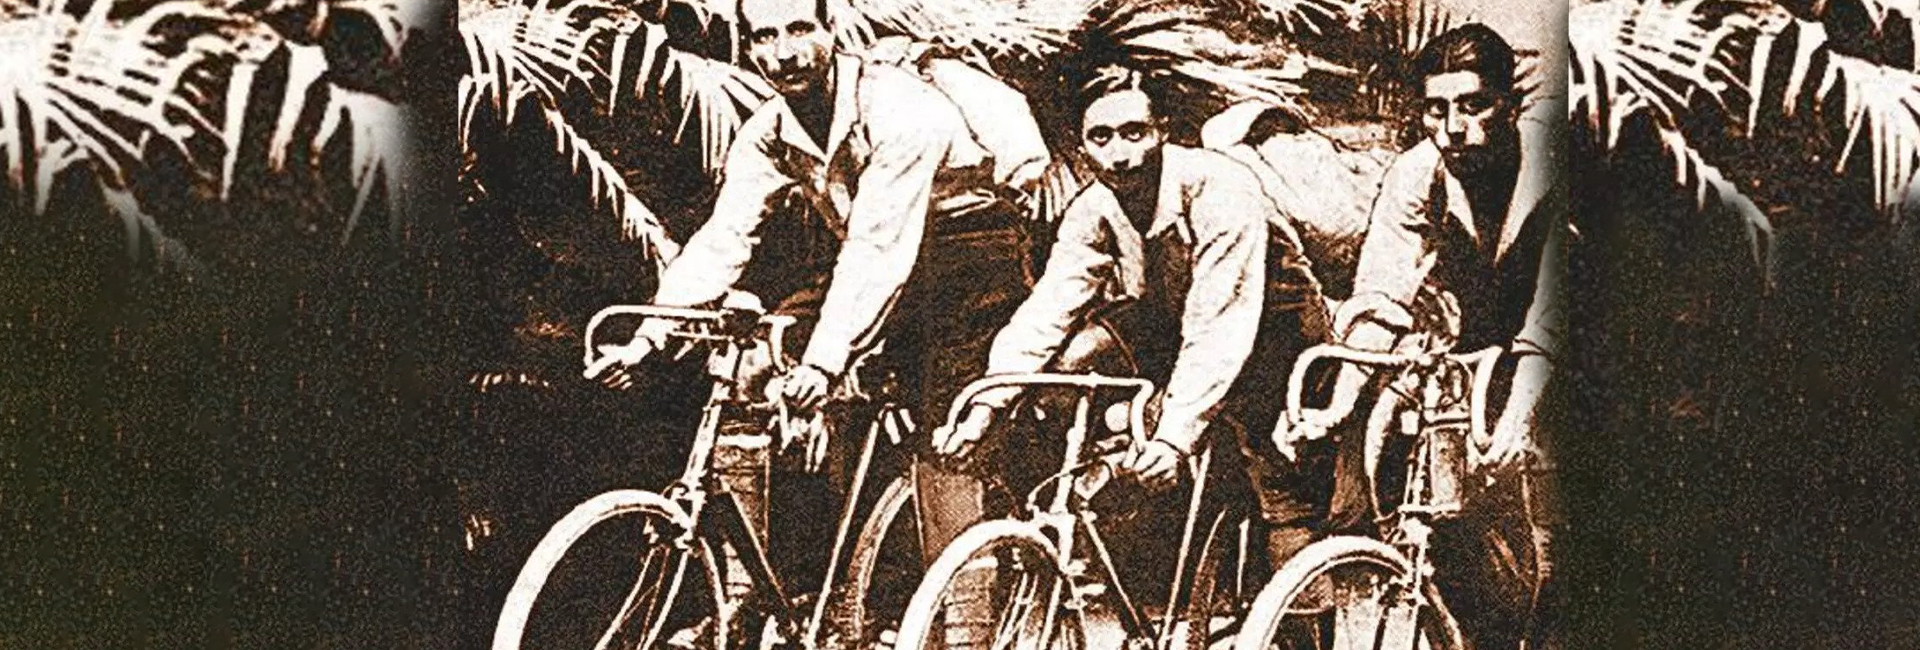 Parsi Cyclists | Global Indian